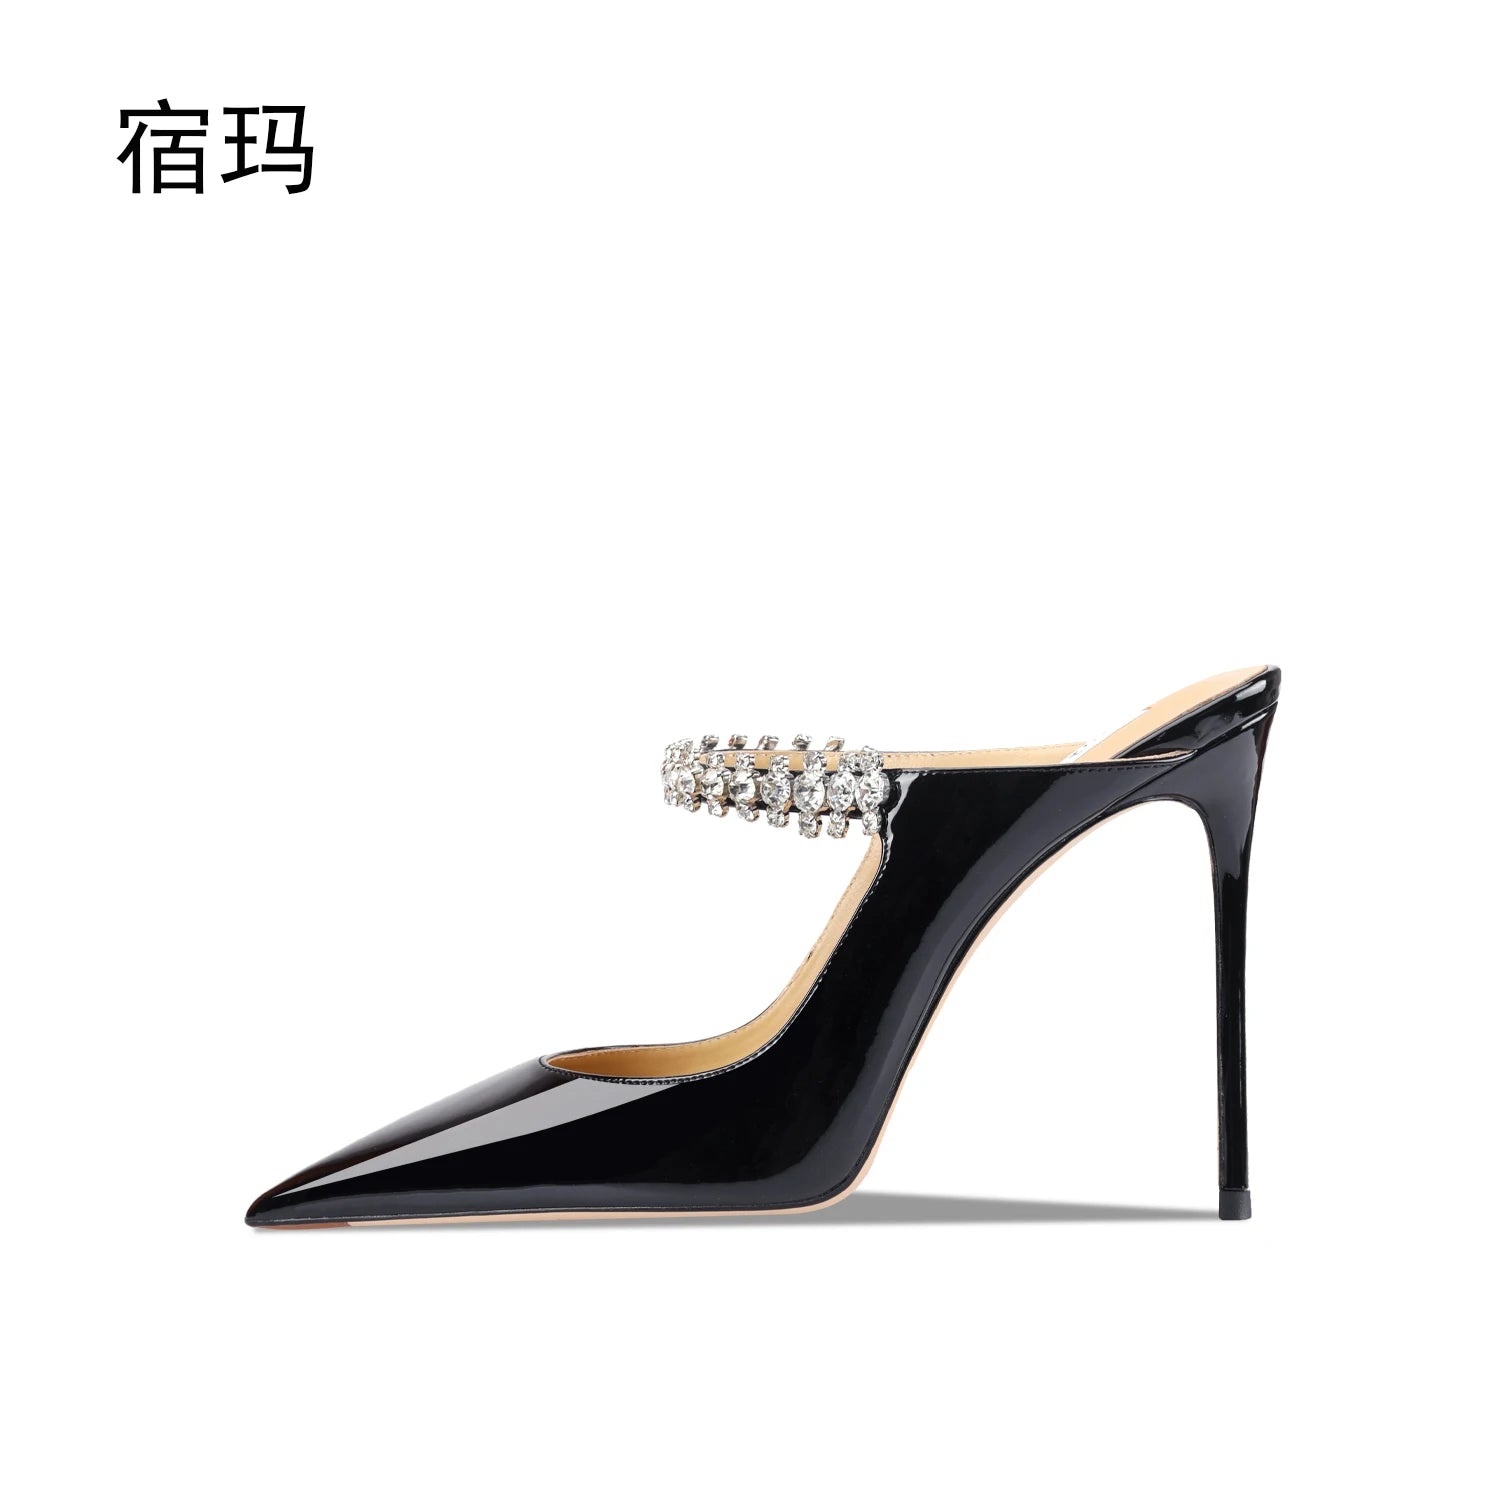 2023 Summer Women Sandals High Heel Slippers Crystal Decoration Pointed Toe Back Strap Elastic Band Elegant Fashion Shoes Ladies